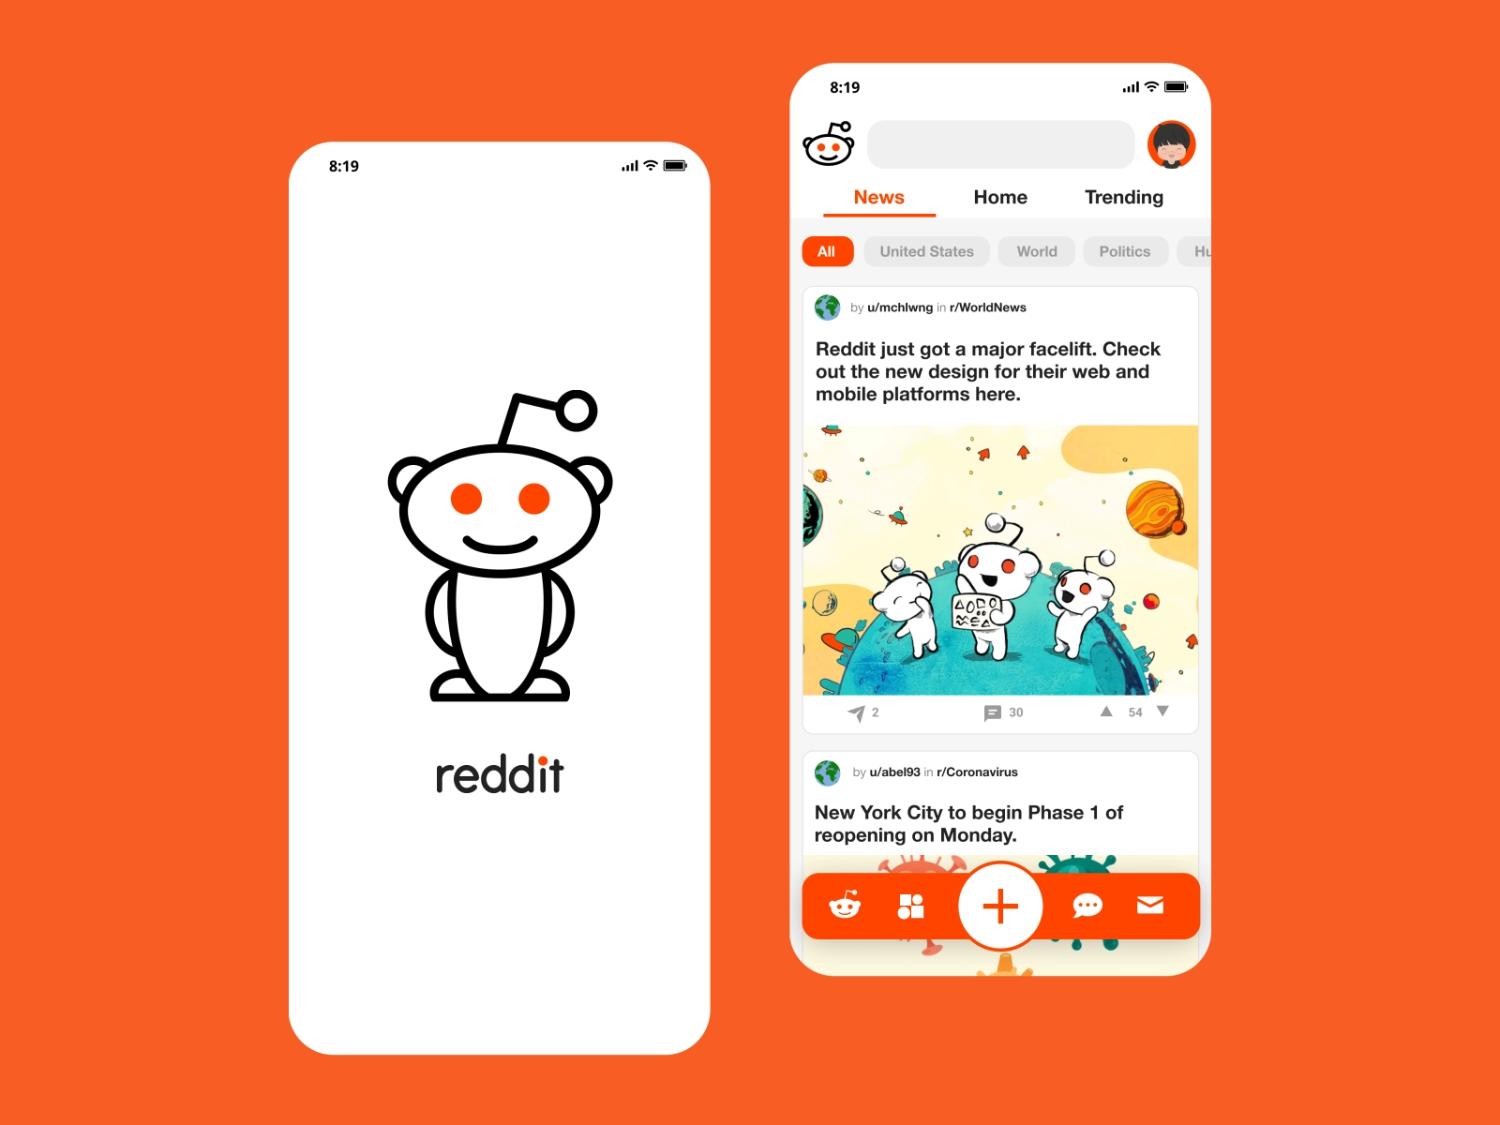 embed images in reddit text post